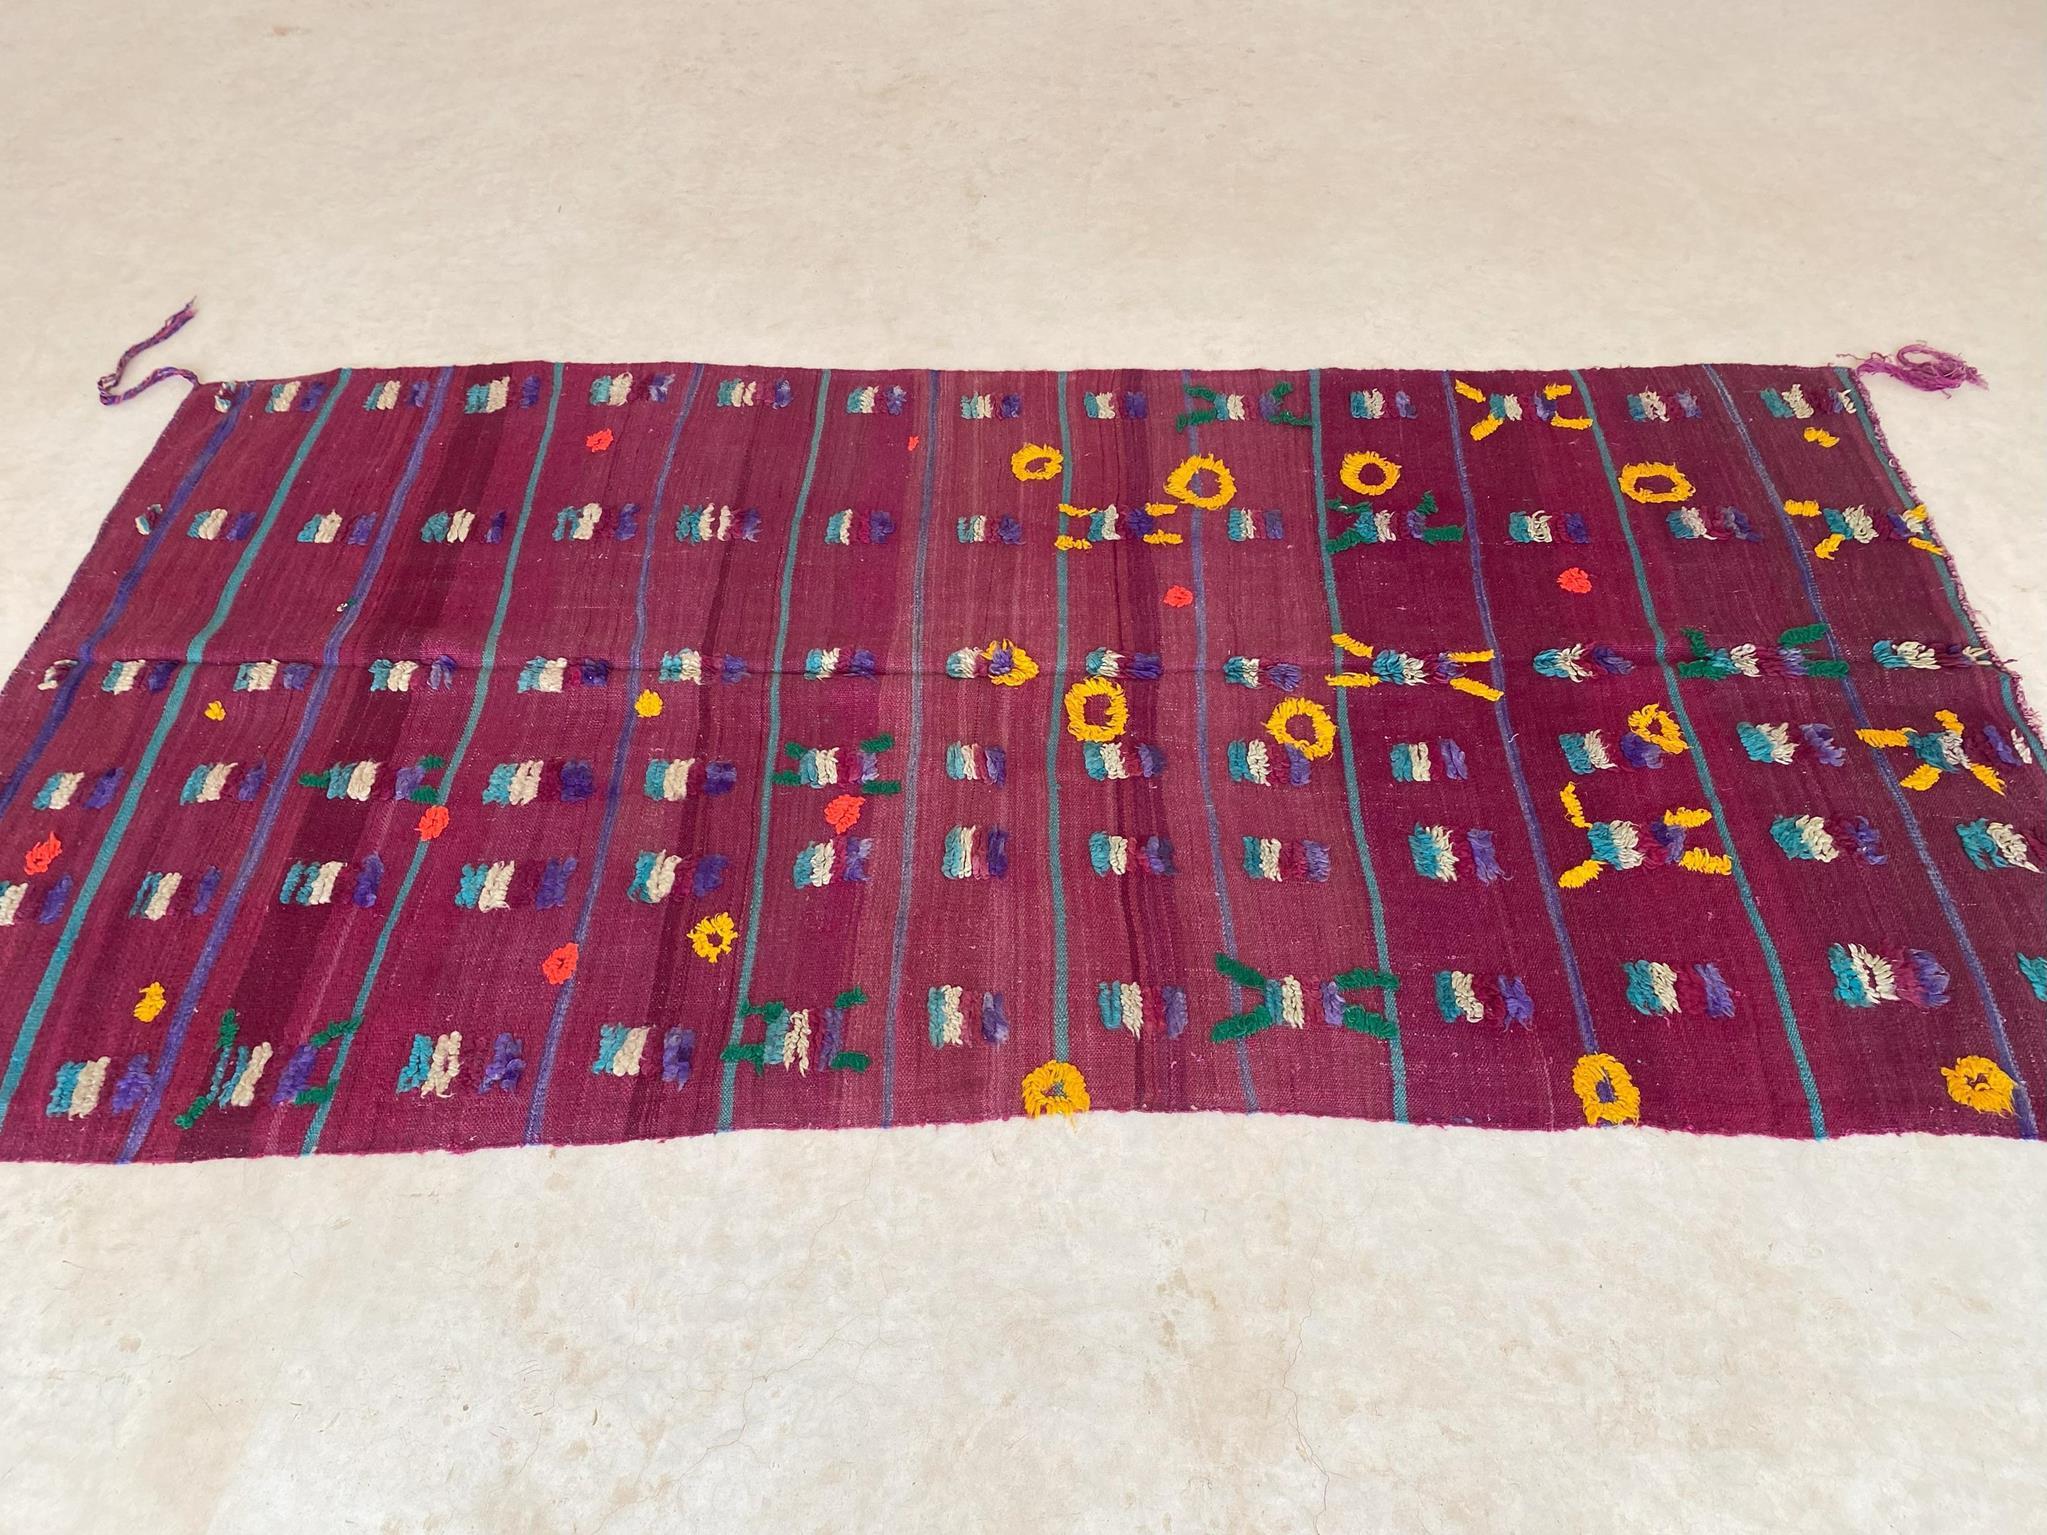 Hand-Woven Vintage Moroccan Kilim textile - Purple and yellow - 4.1x8.3feet / 127x252cm For Sale